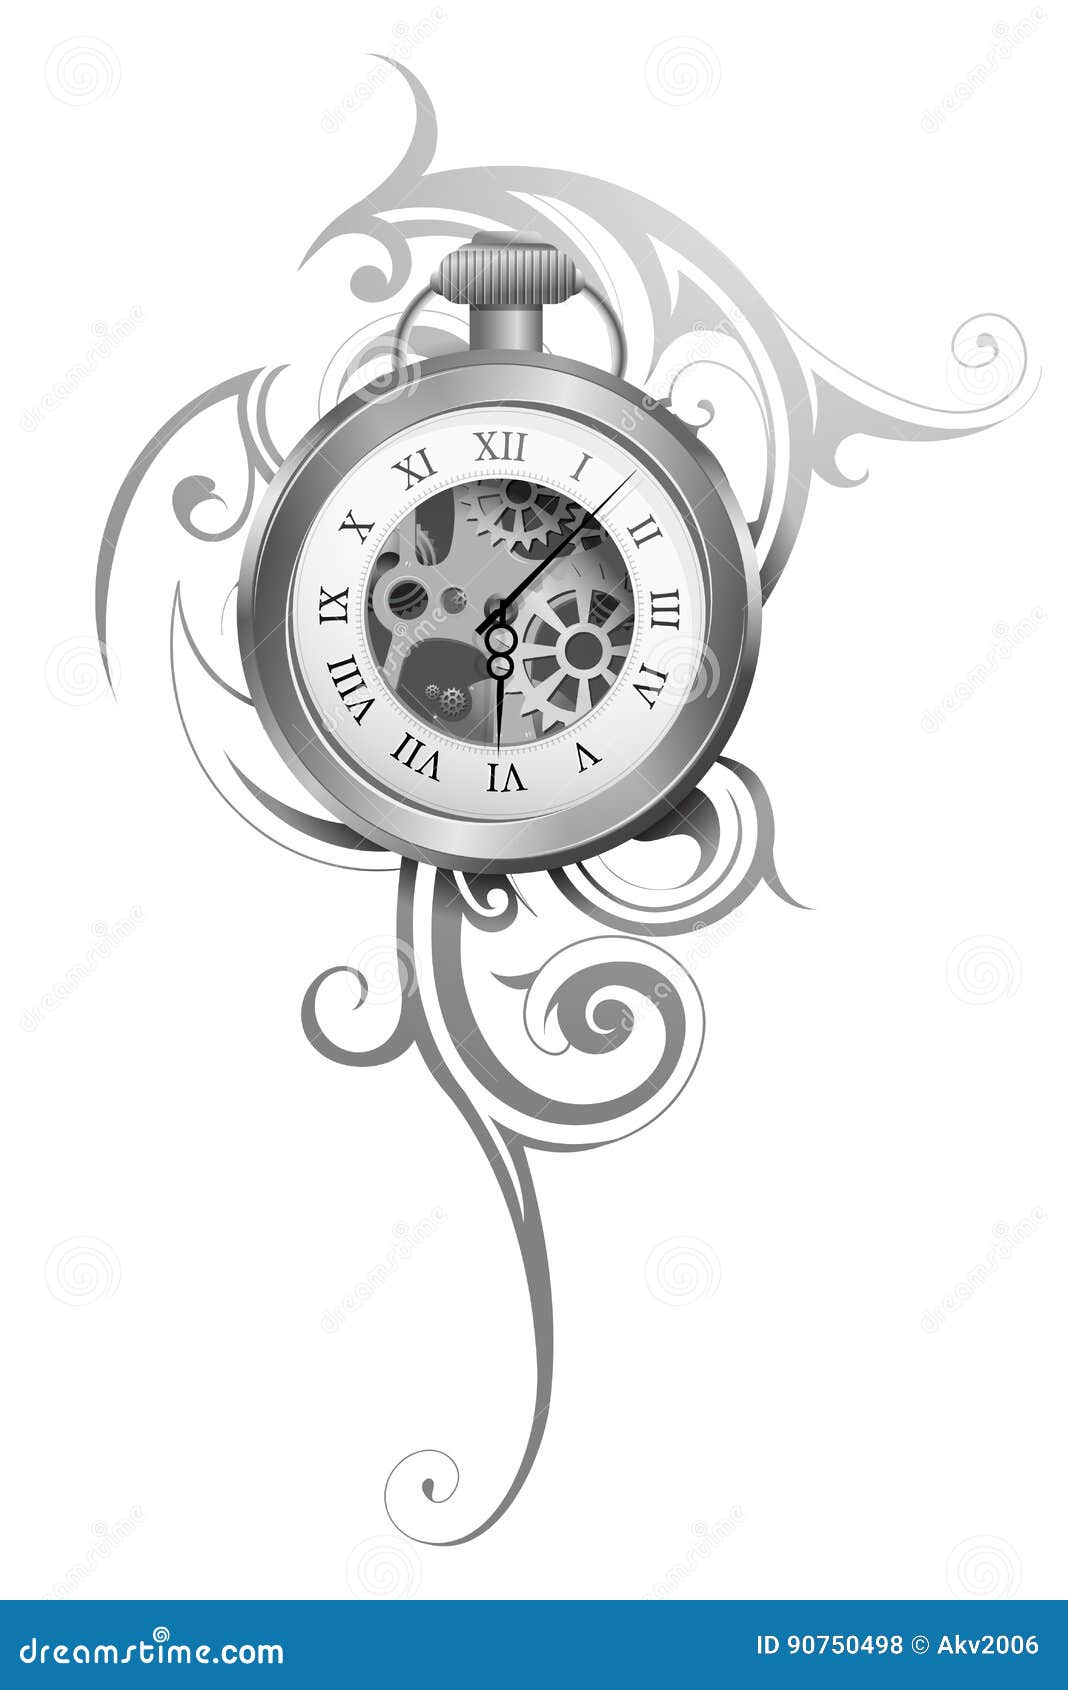 Pocket Watch Tattoo Vector Images (79)